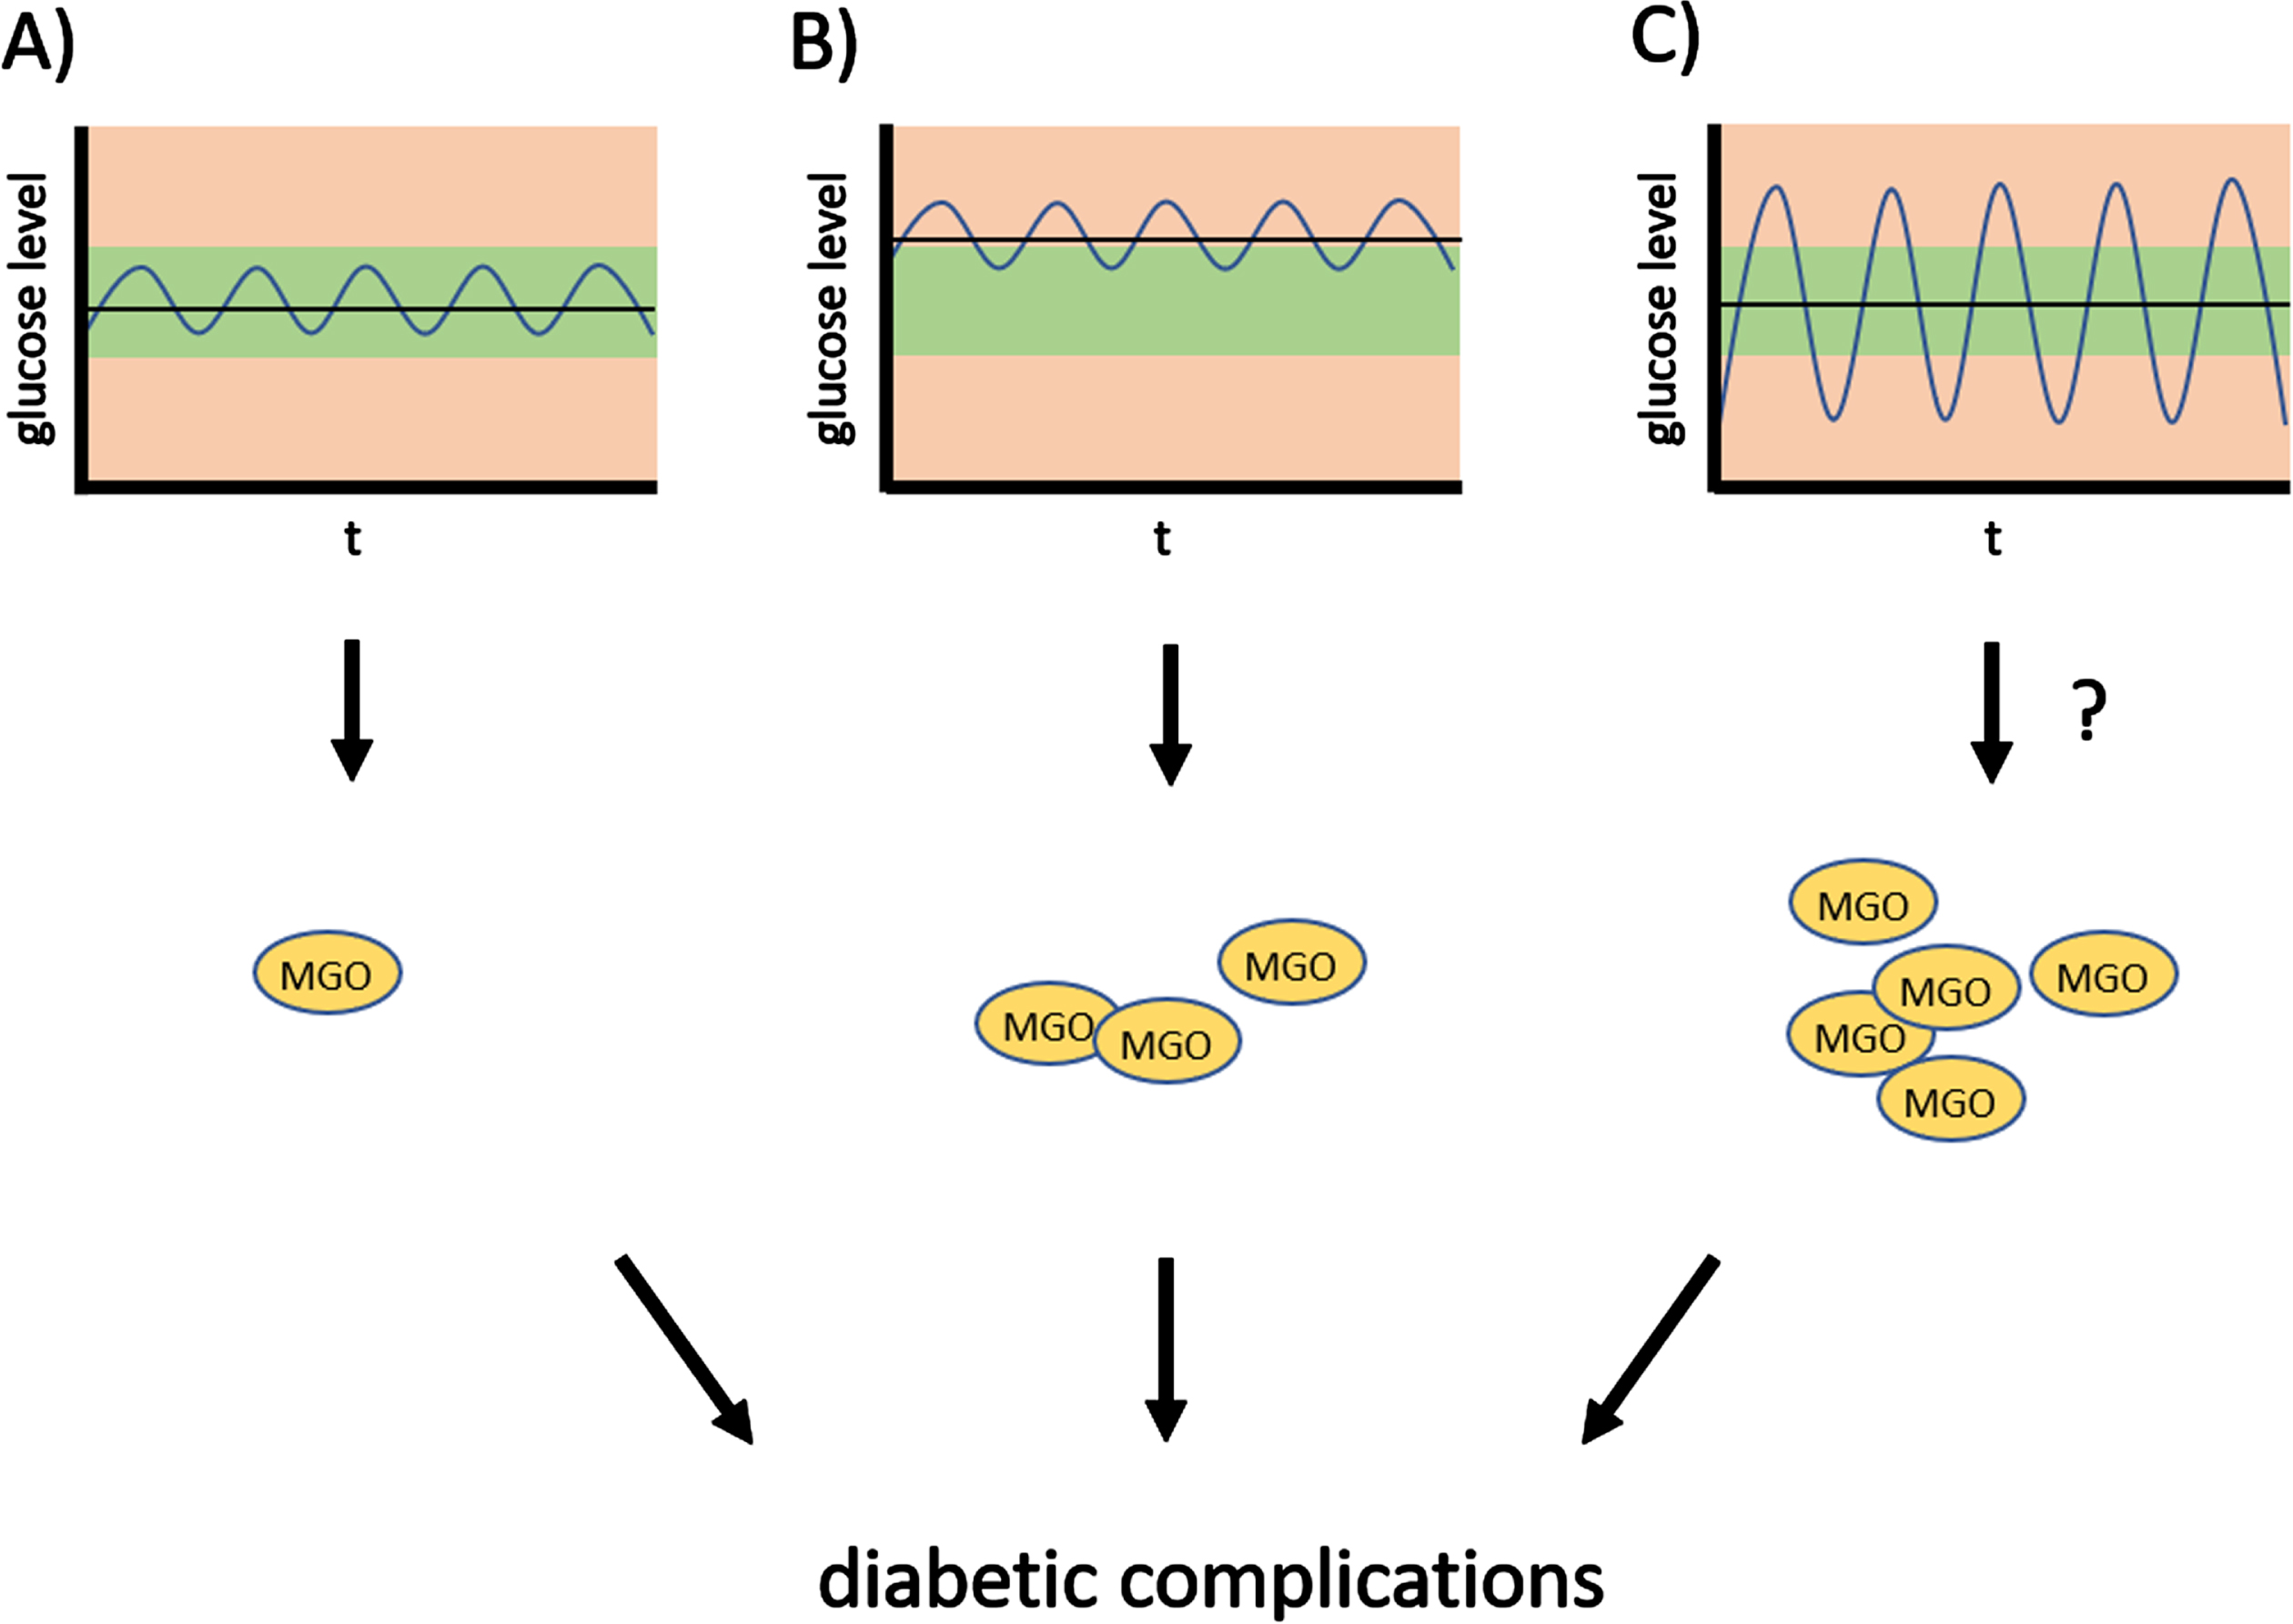 Oscillations of glucose levels and diabetic complications. Strong oscillations of glucose levels—glycemic variability—throughout the day contribute to diabetic complications, and possibly increase susceptibility to PD.